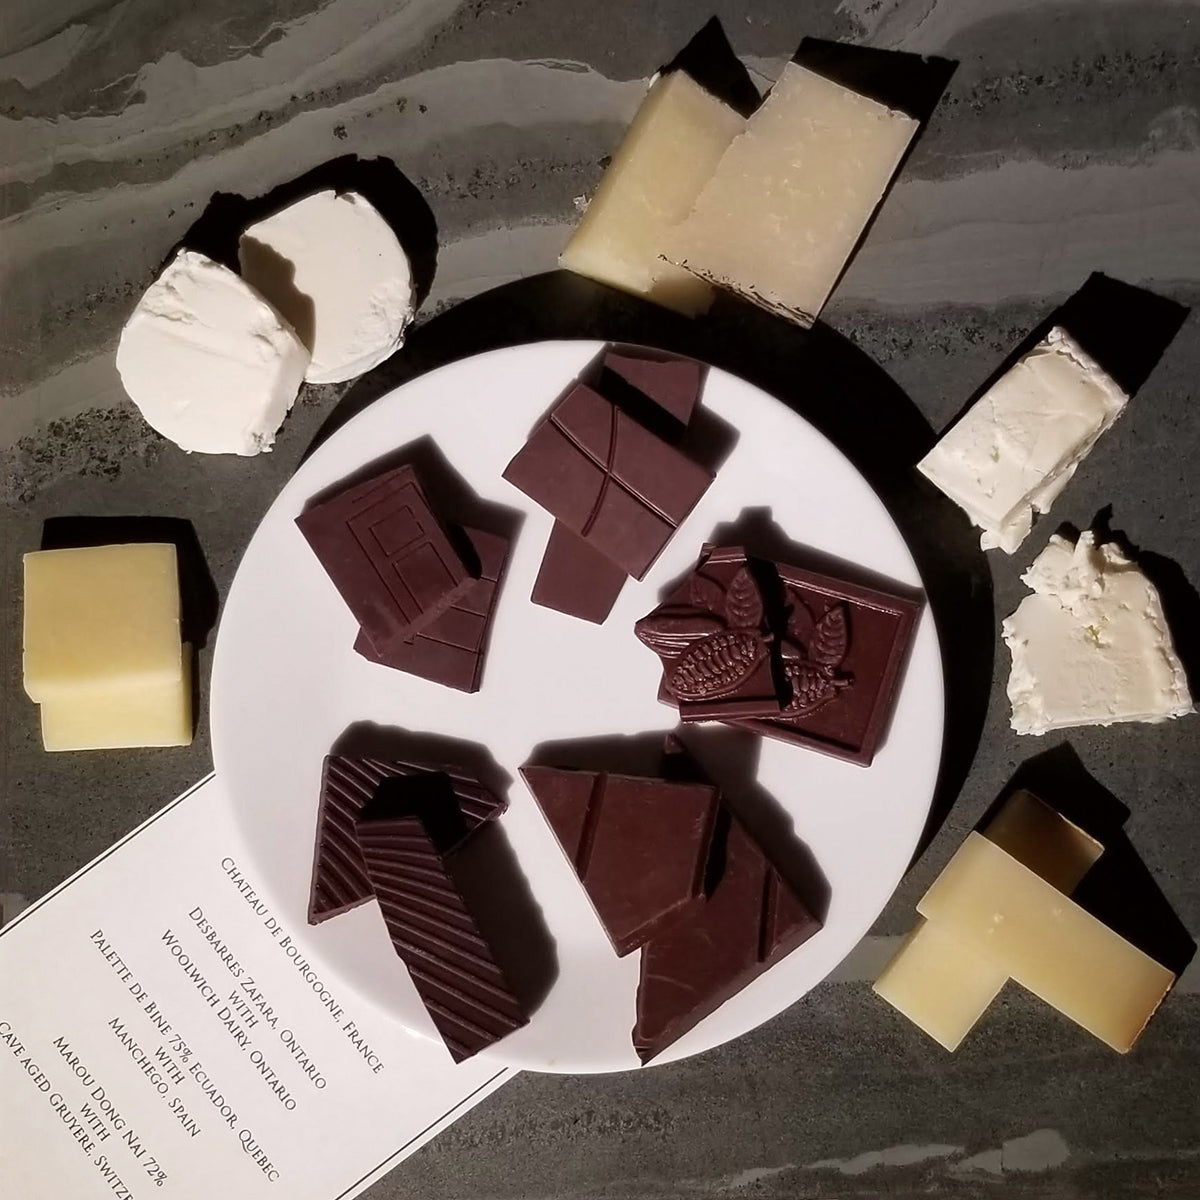 chocolate and cheese pairing notes, JoJo CoCo, Canada